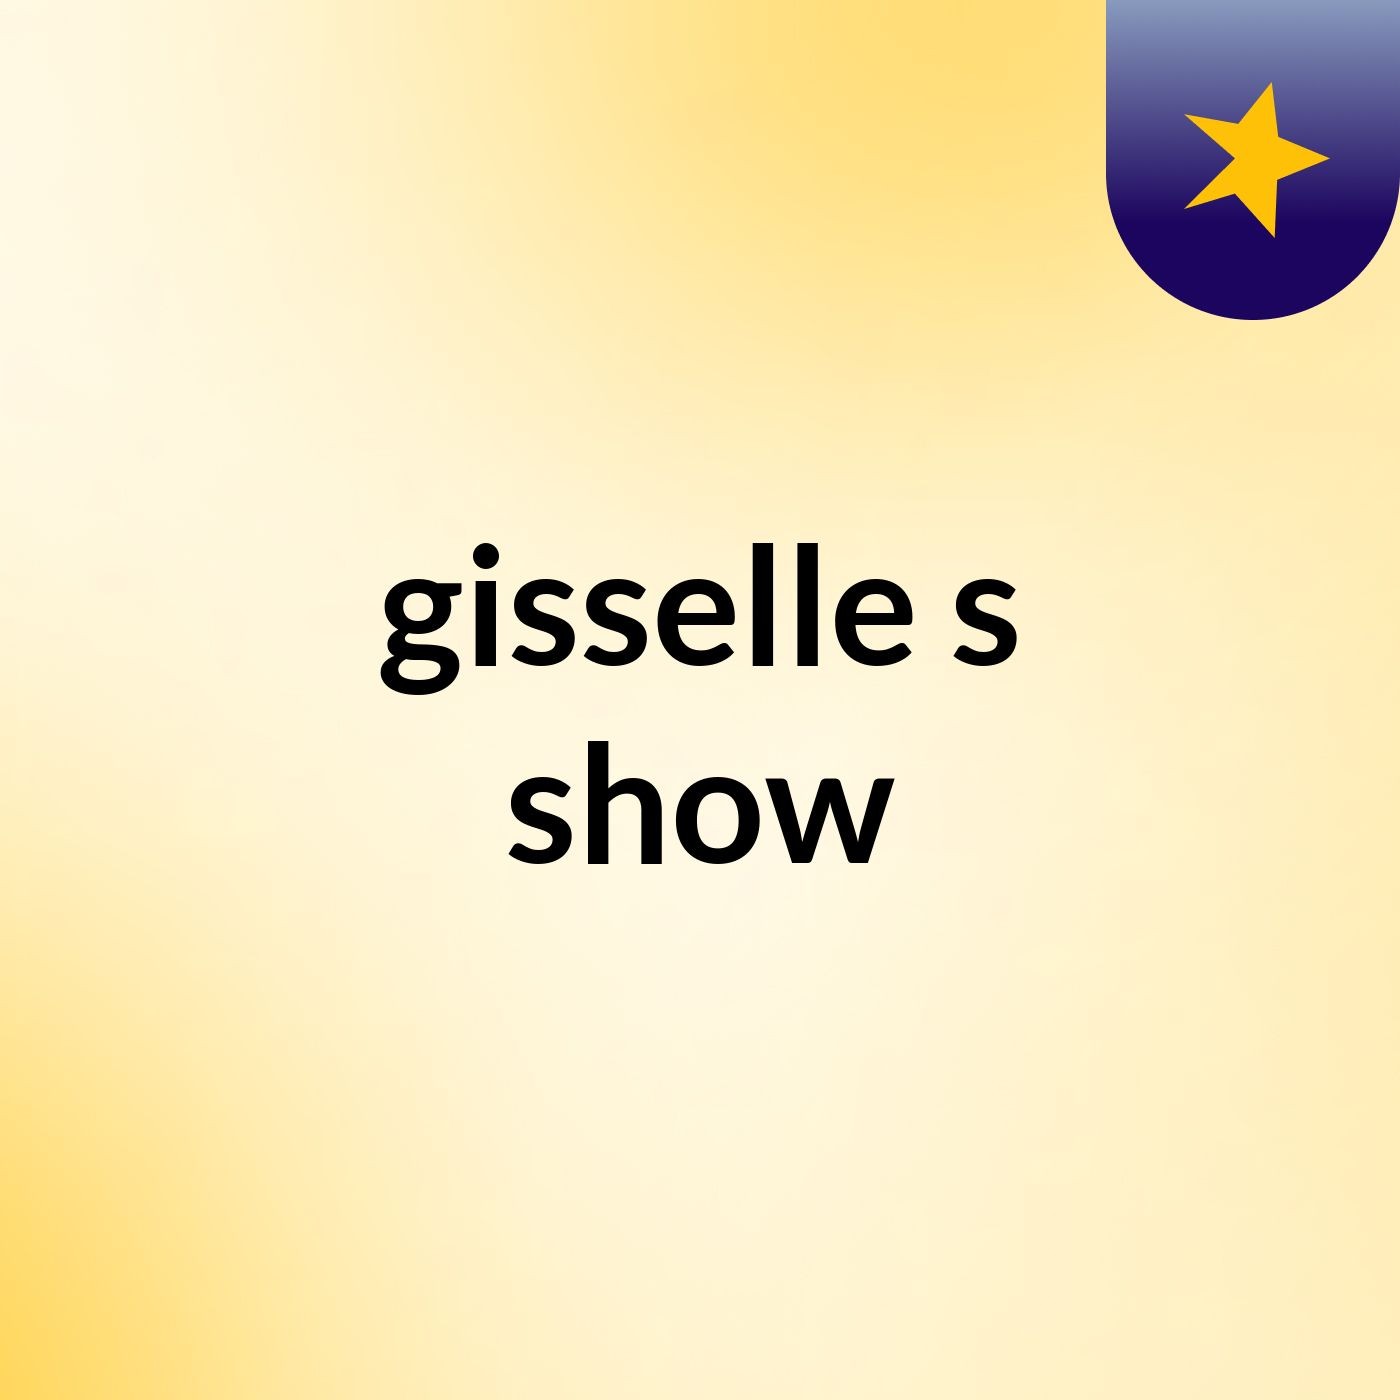 gisselle's show